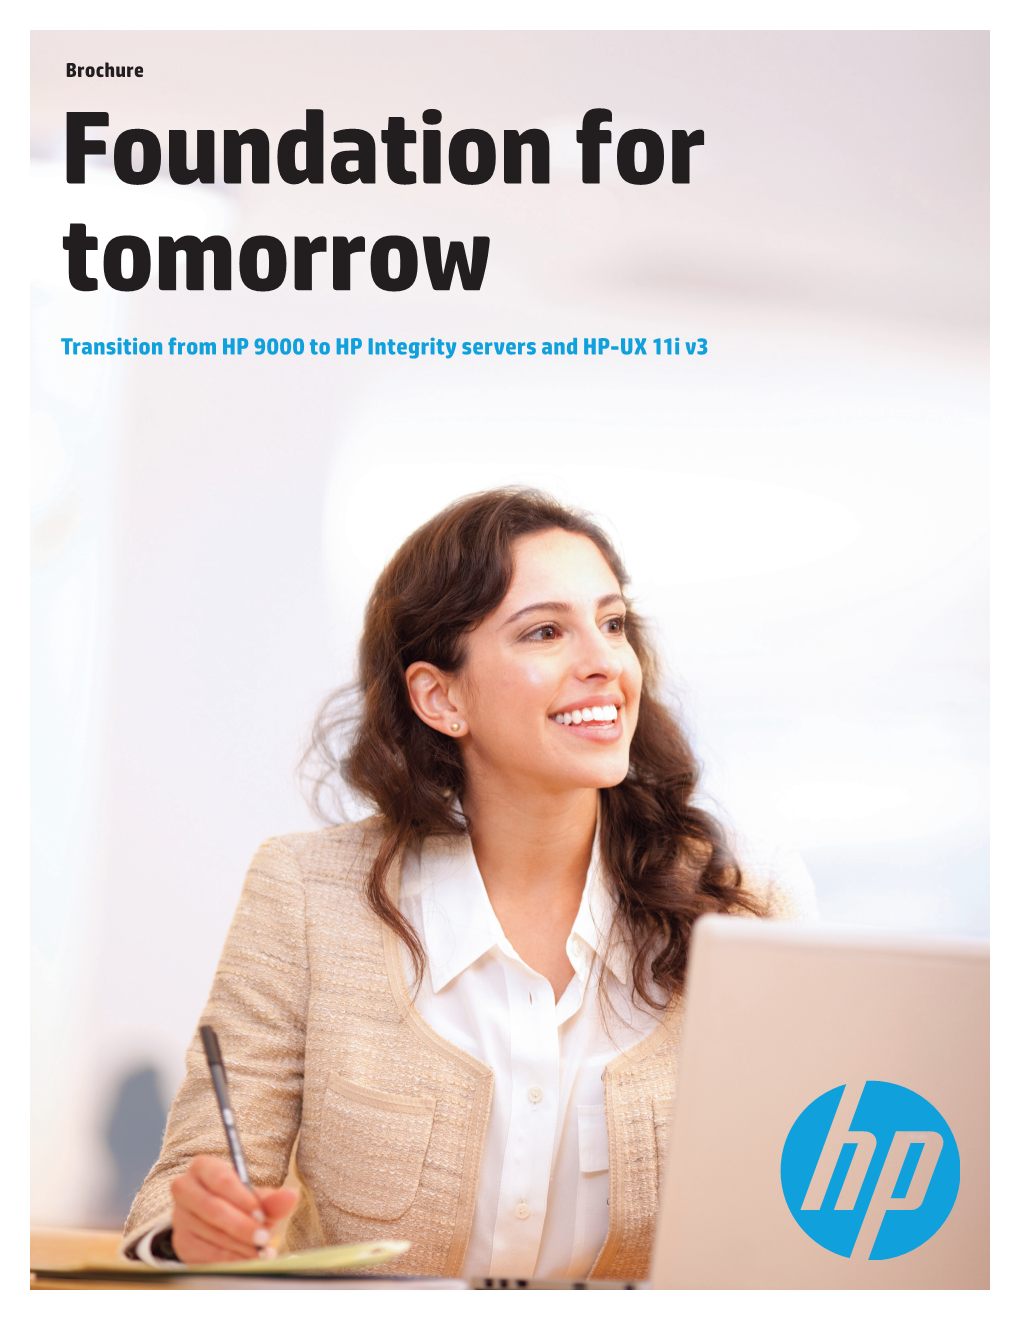 Transition from HP 9000 to HP Integrity Servers and HP-UX 11I V3